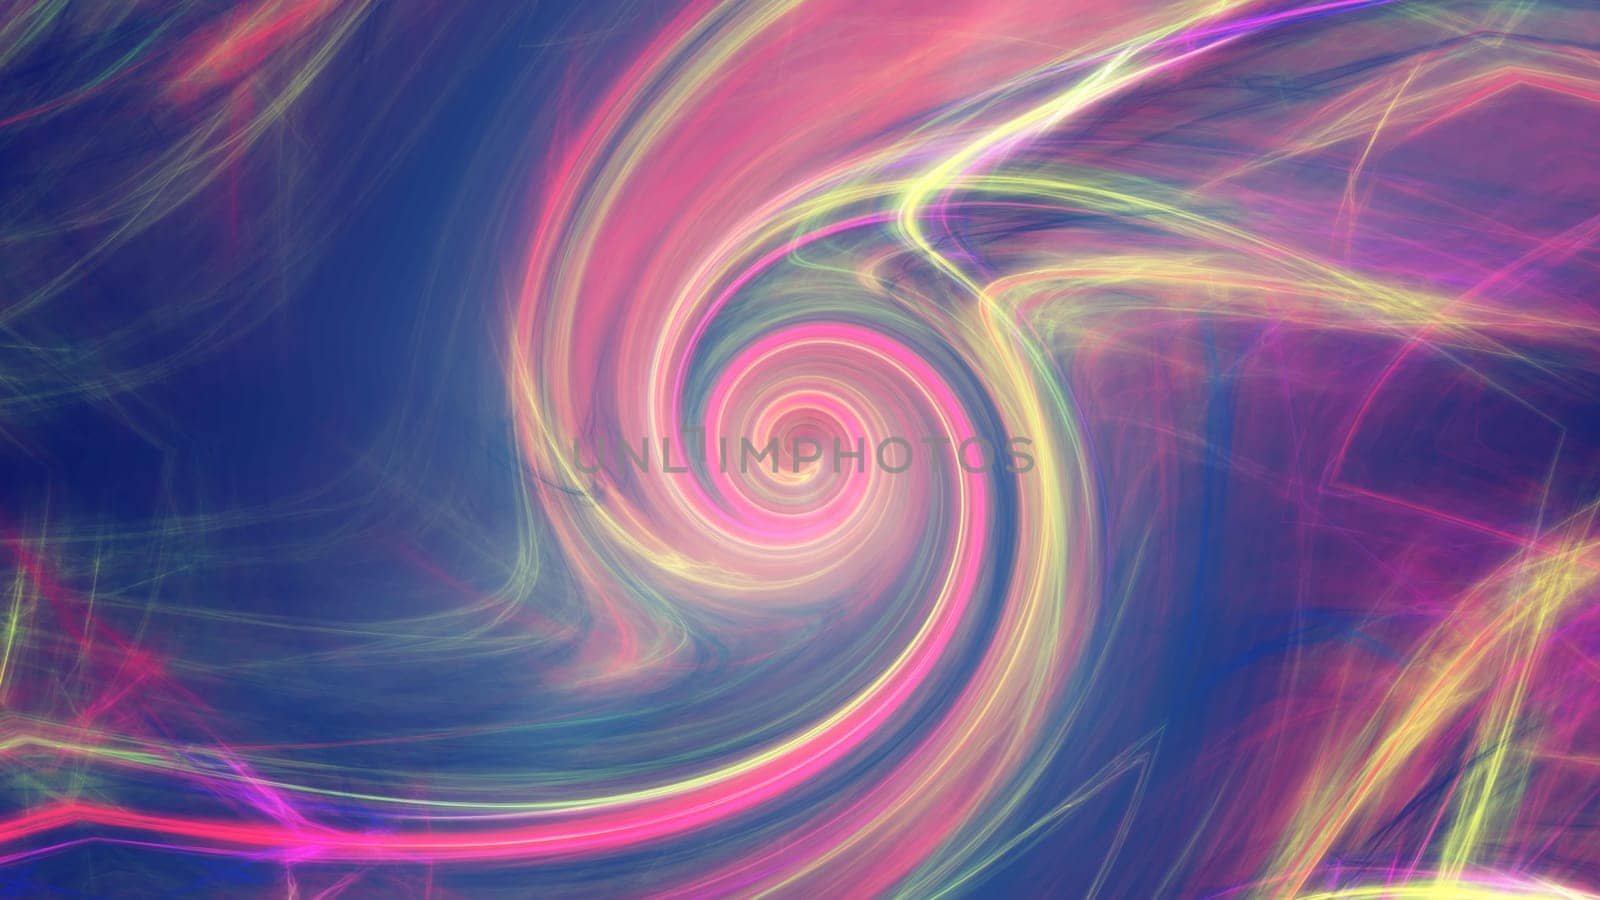 line color abstract background illustration render graphic